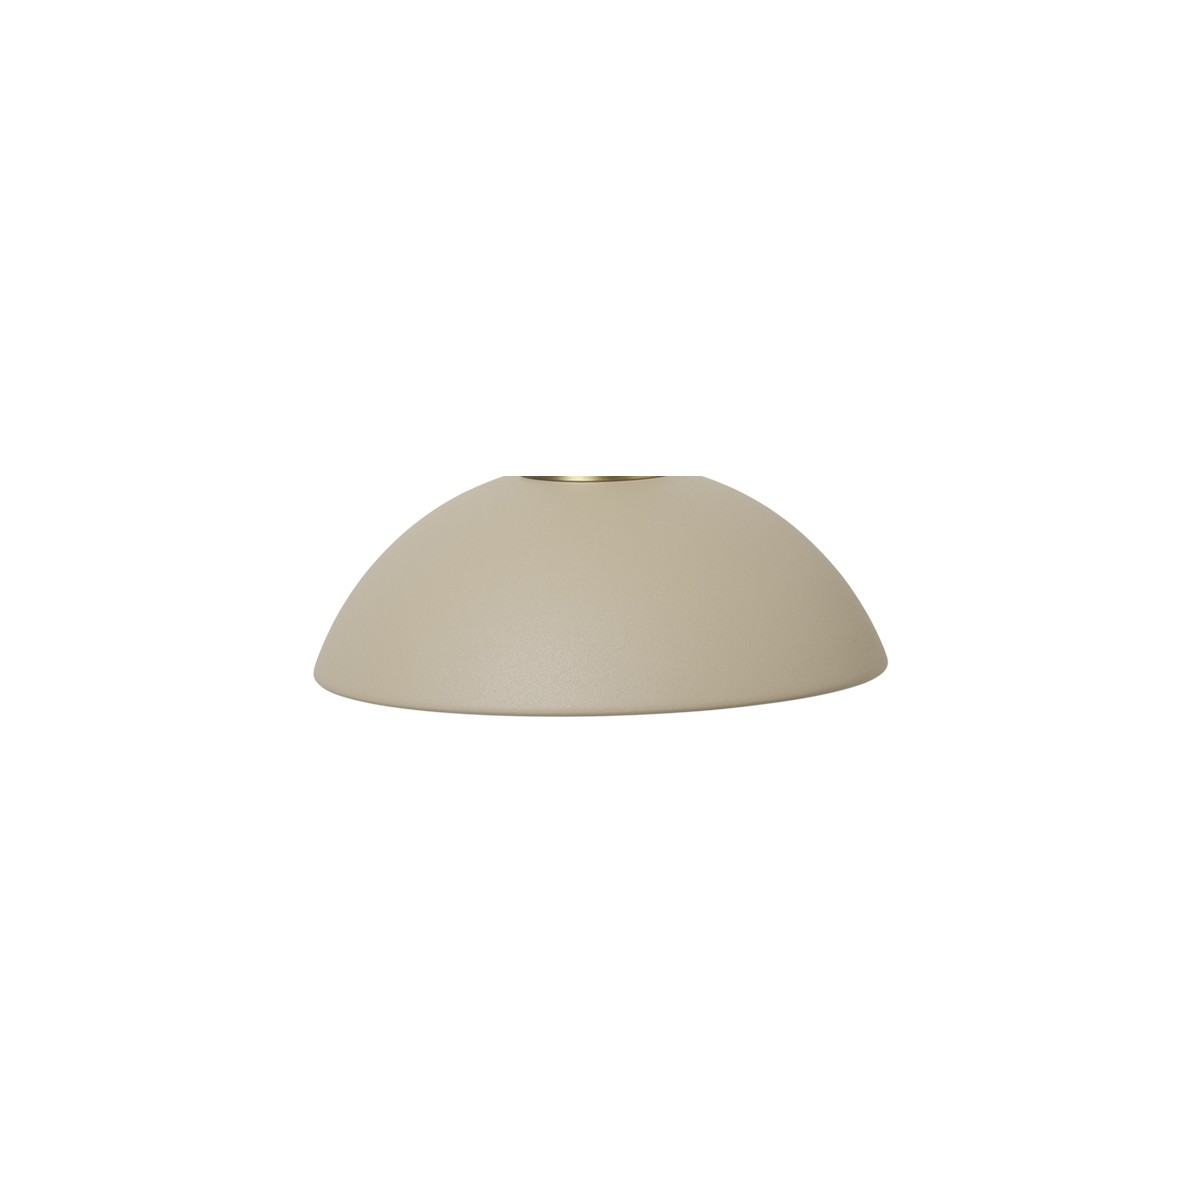 cashmere - Hoop shade - Collect Lighting